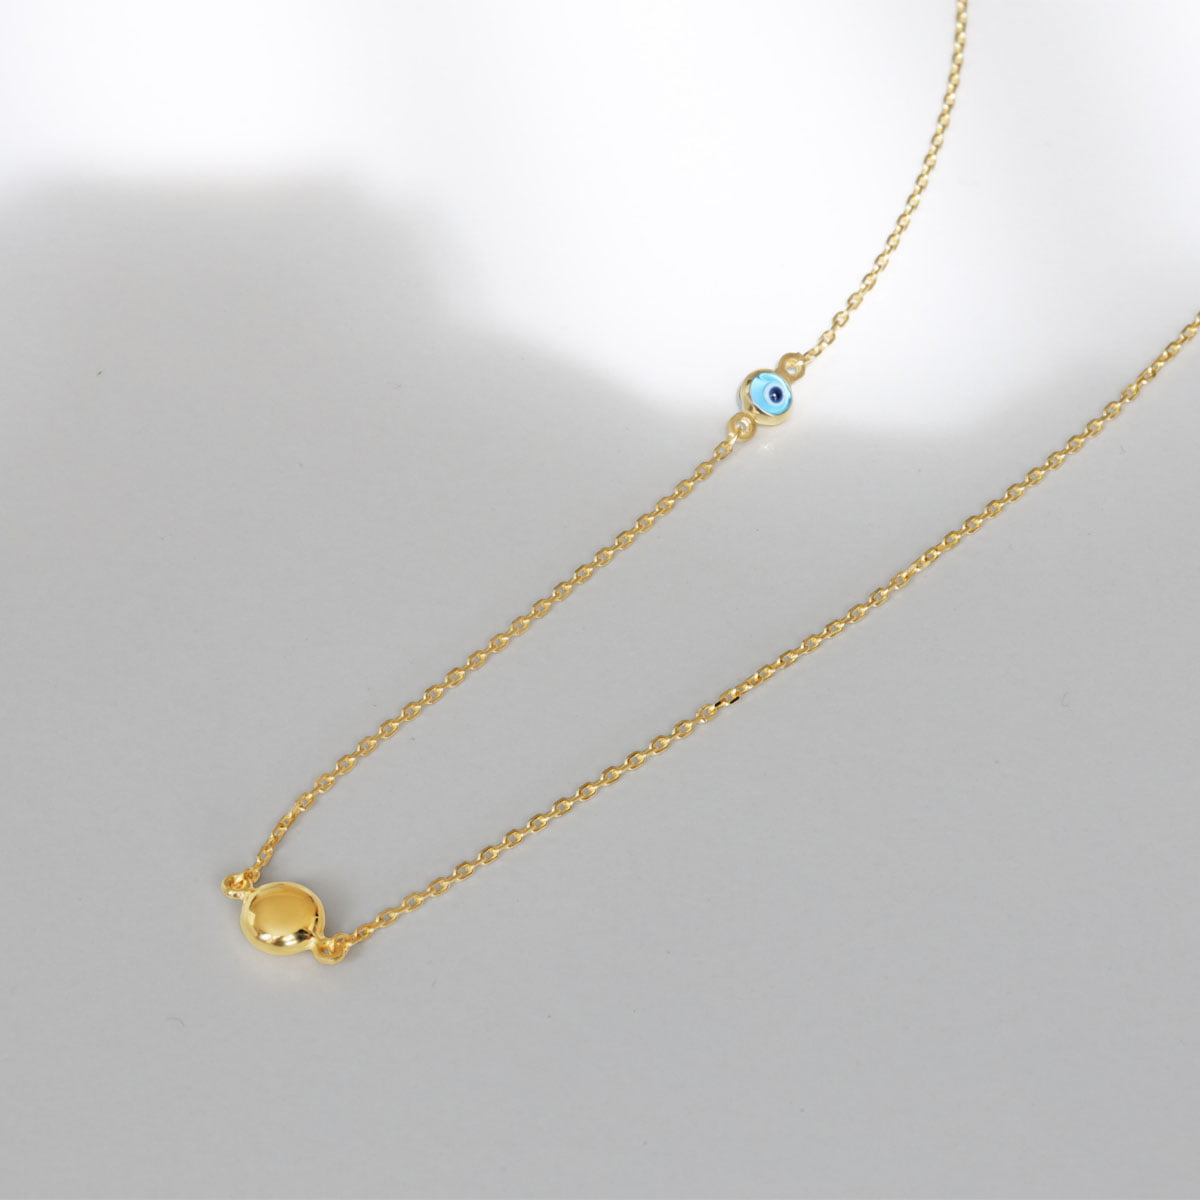 18ct Solid Yellow Gold Evil Eye Necklace